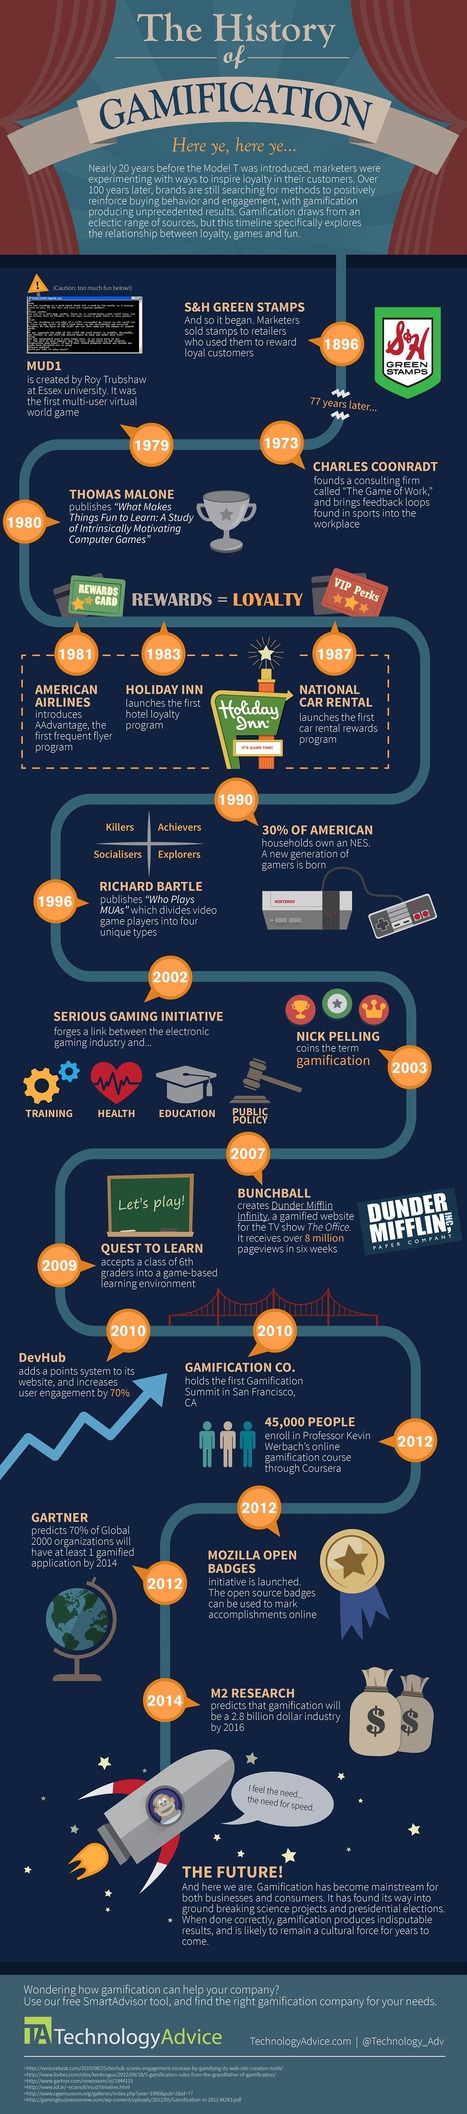 The History of Gamification Shows A Bright Future Ahead [Infographic] | Must Play | Scoop.it